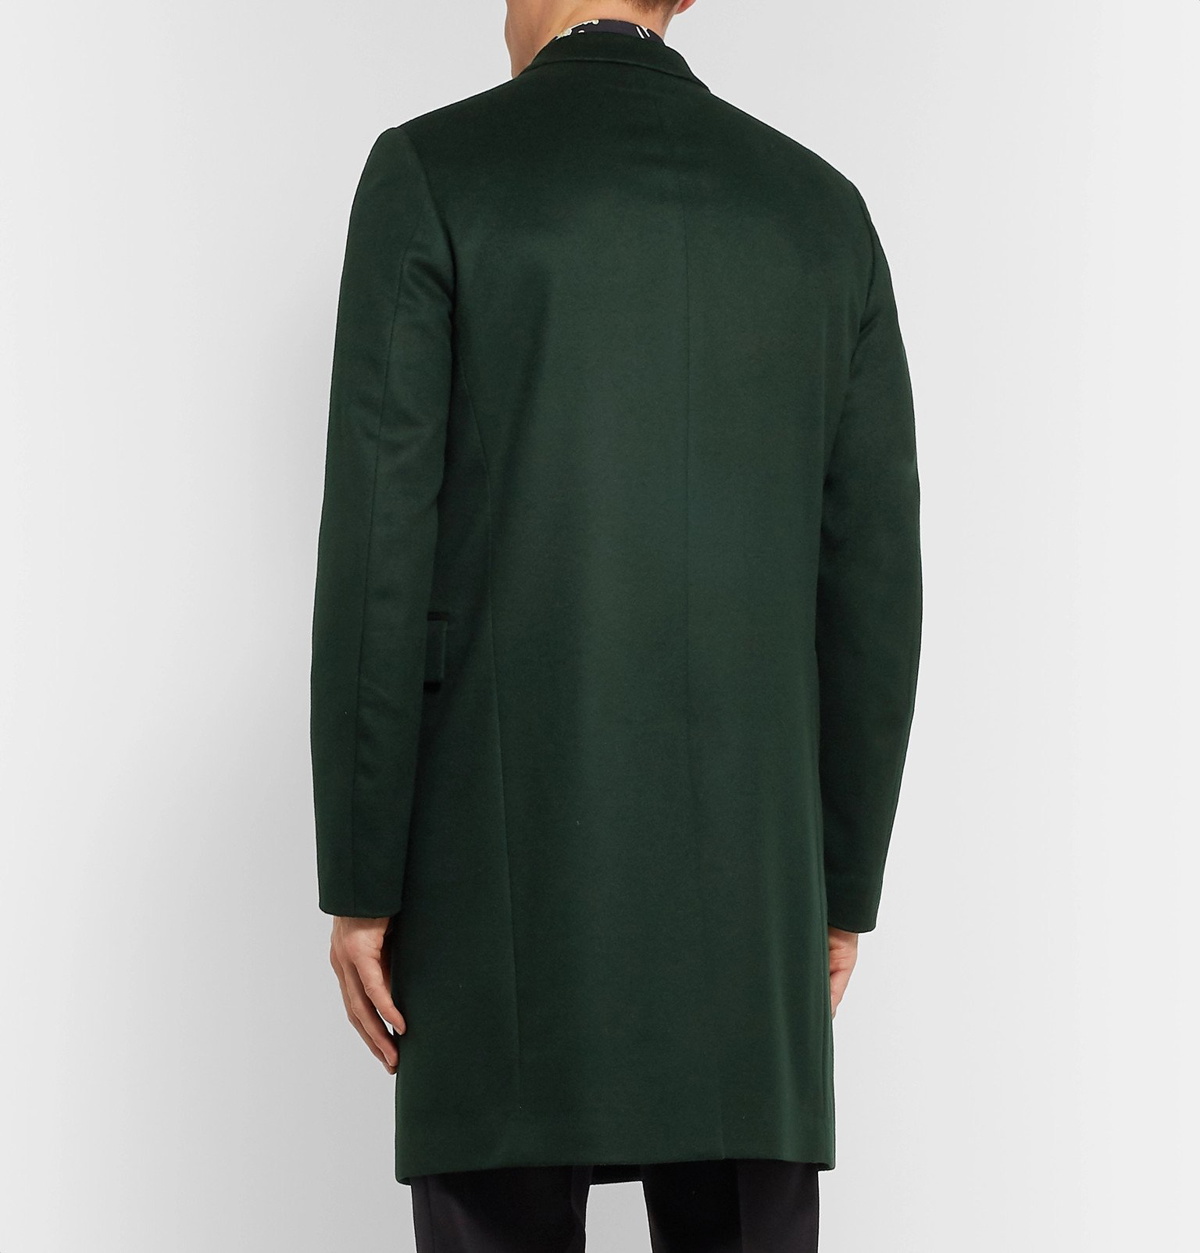 Paul Smith - Wool and Cashmere-Blend Overcoat - Green